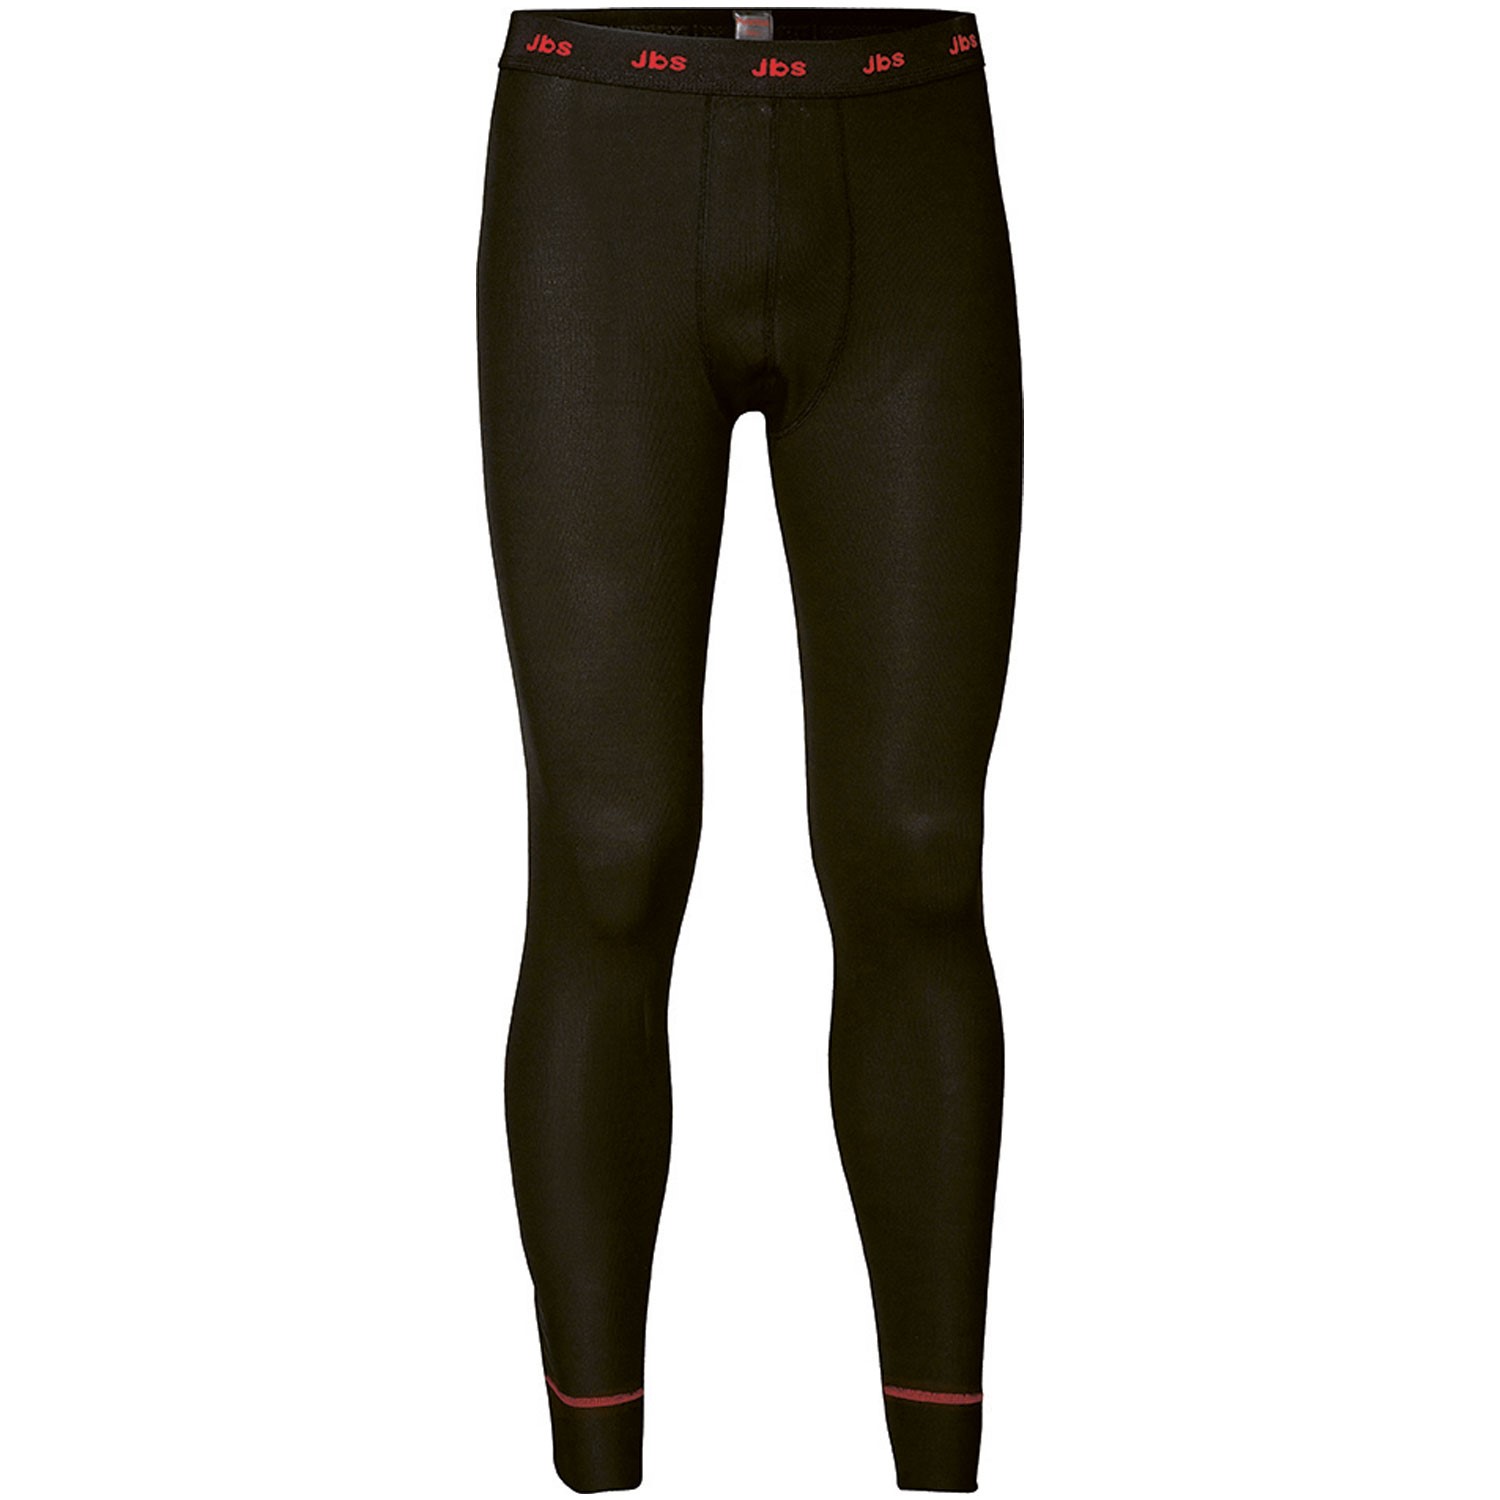 JBS Classic Function Long Legs - Base layer - Clothing - Timarco.co.uk